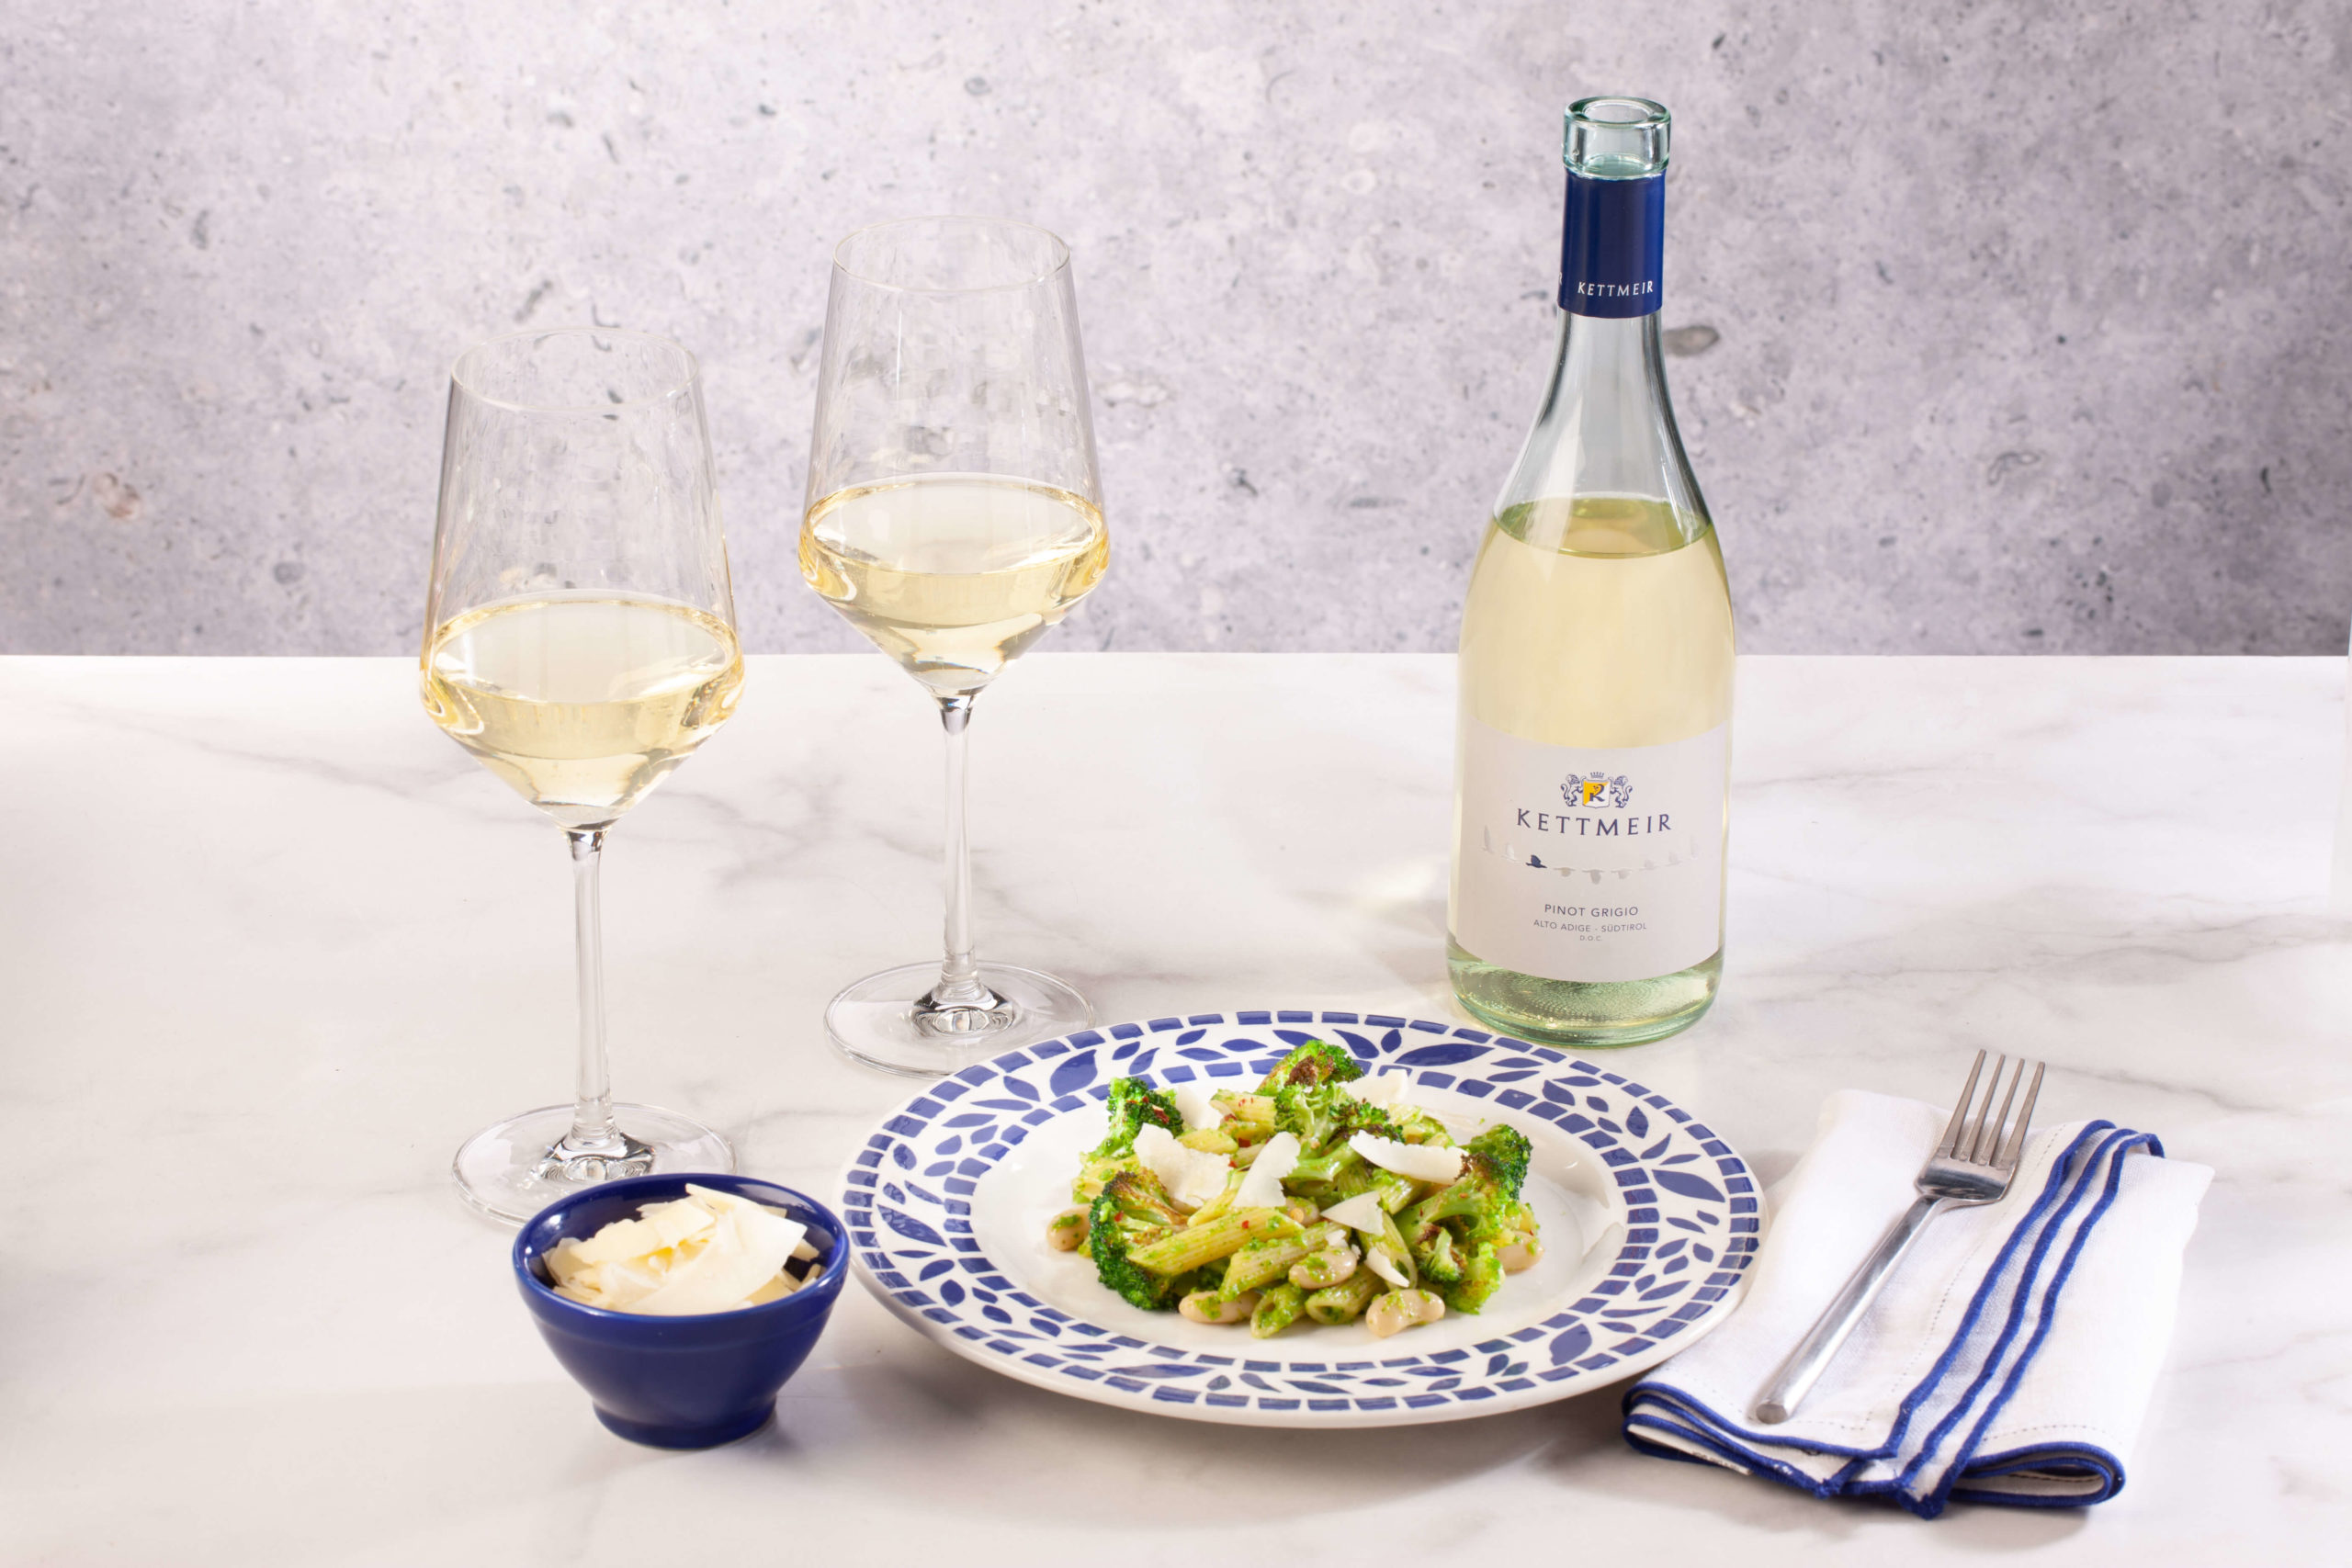 Recipes of a dish paired with a bottled of Kettmeir wine